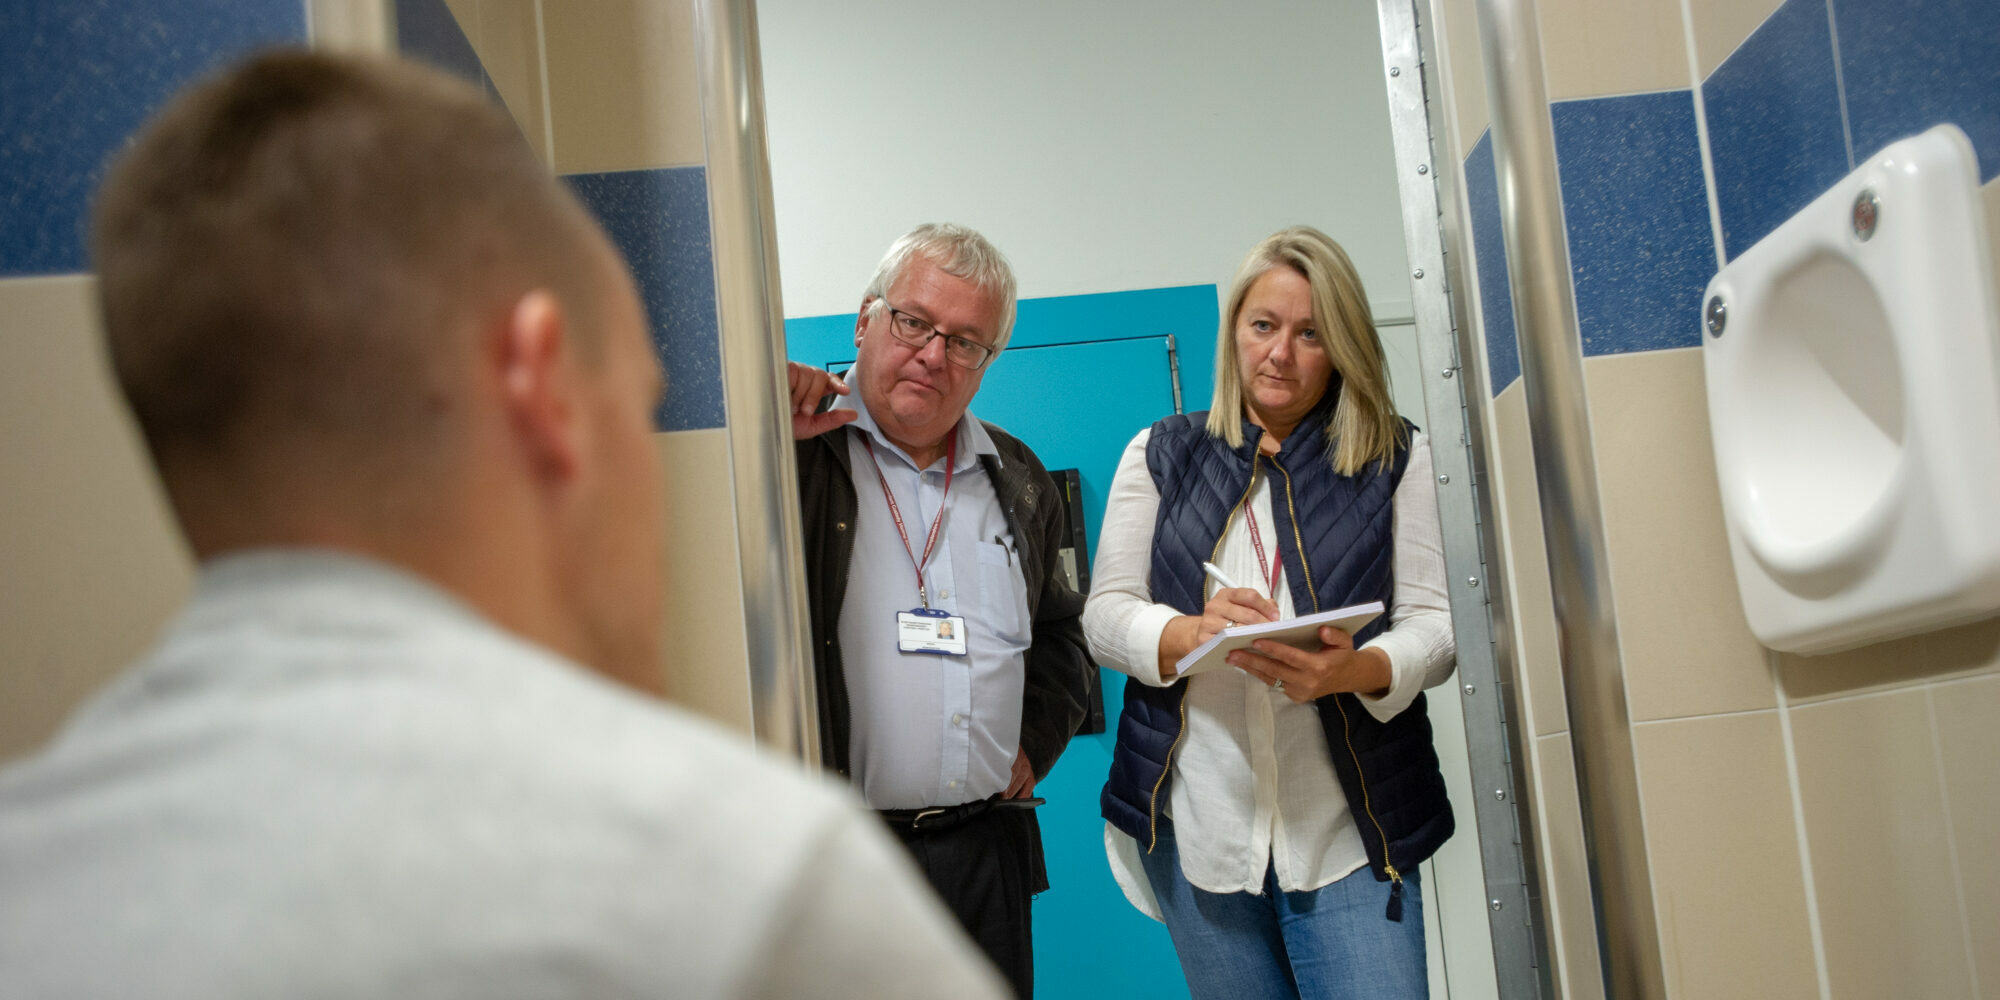 Two volunteers for the Independent Custody Visiting (ICV) scheme are pictured in a custody cell speaking to a detainee, who is not fully identified